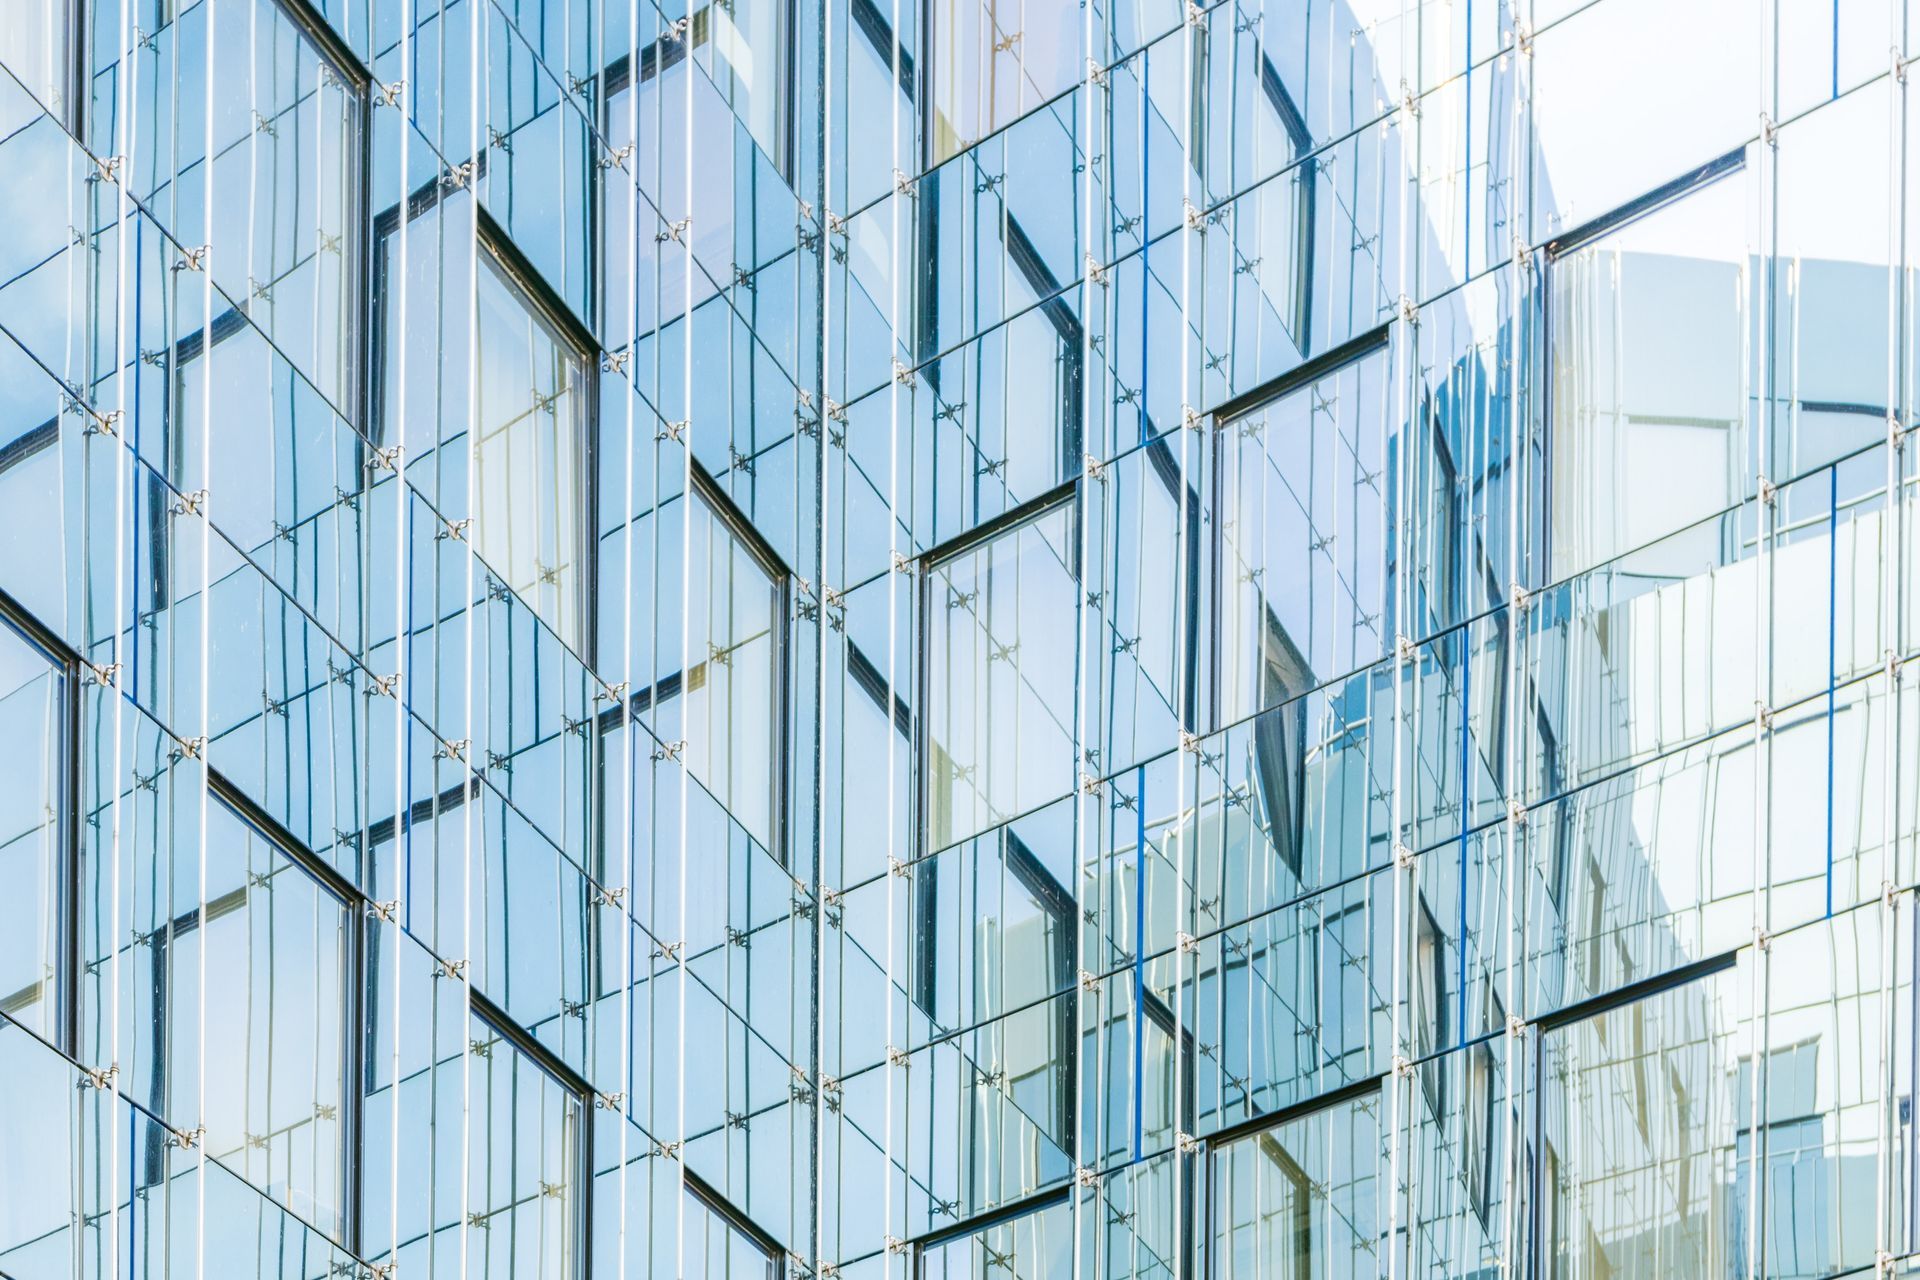 An elegant building constructed of reflective glass.